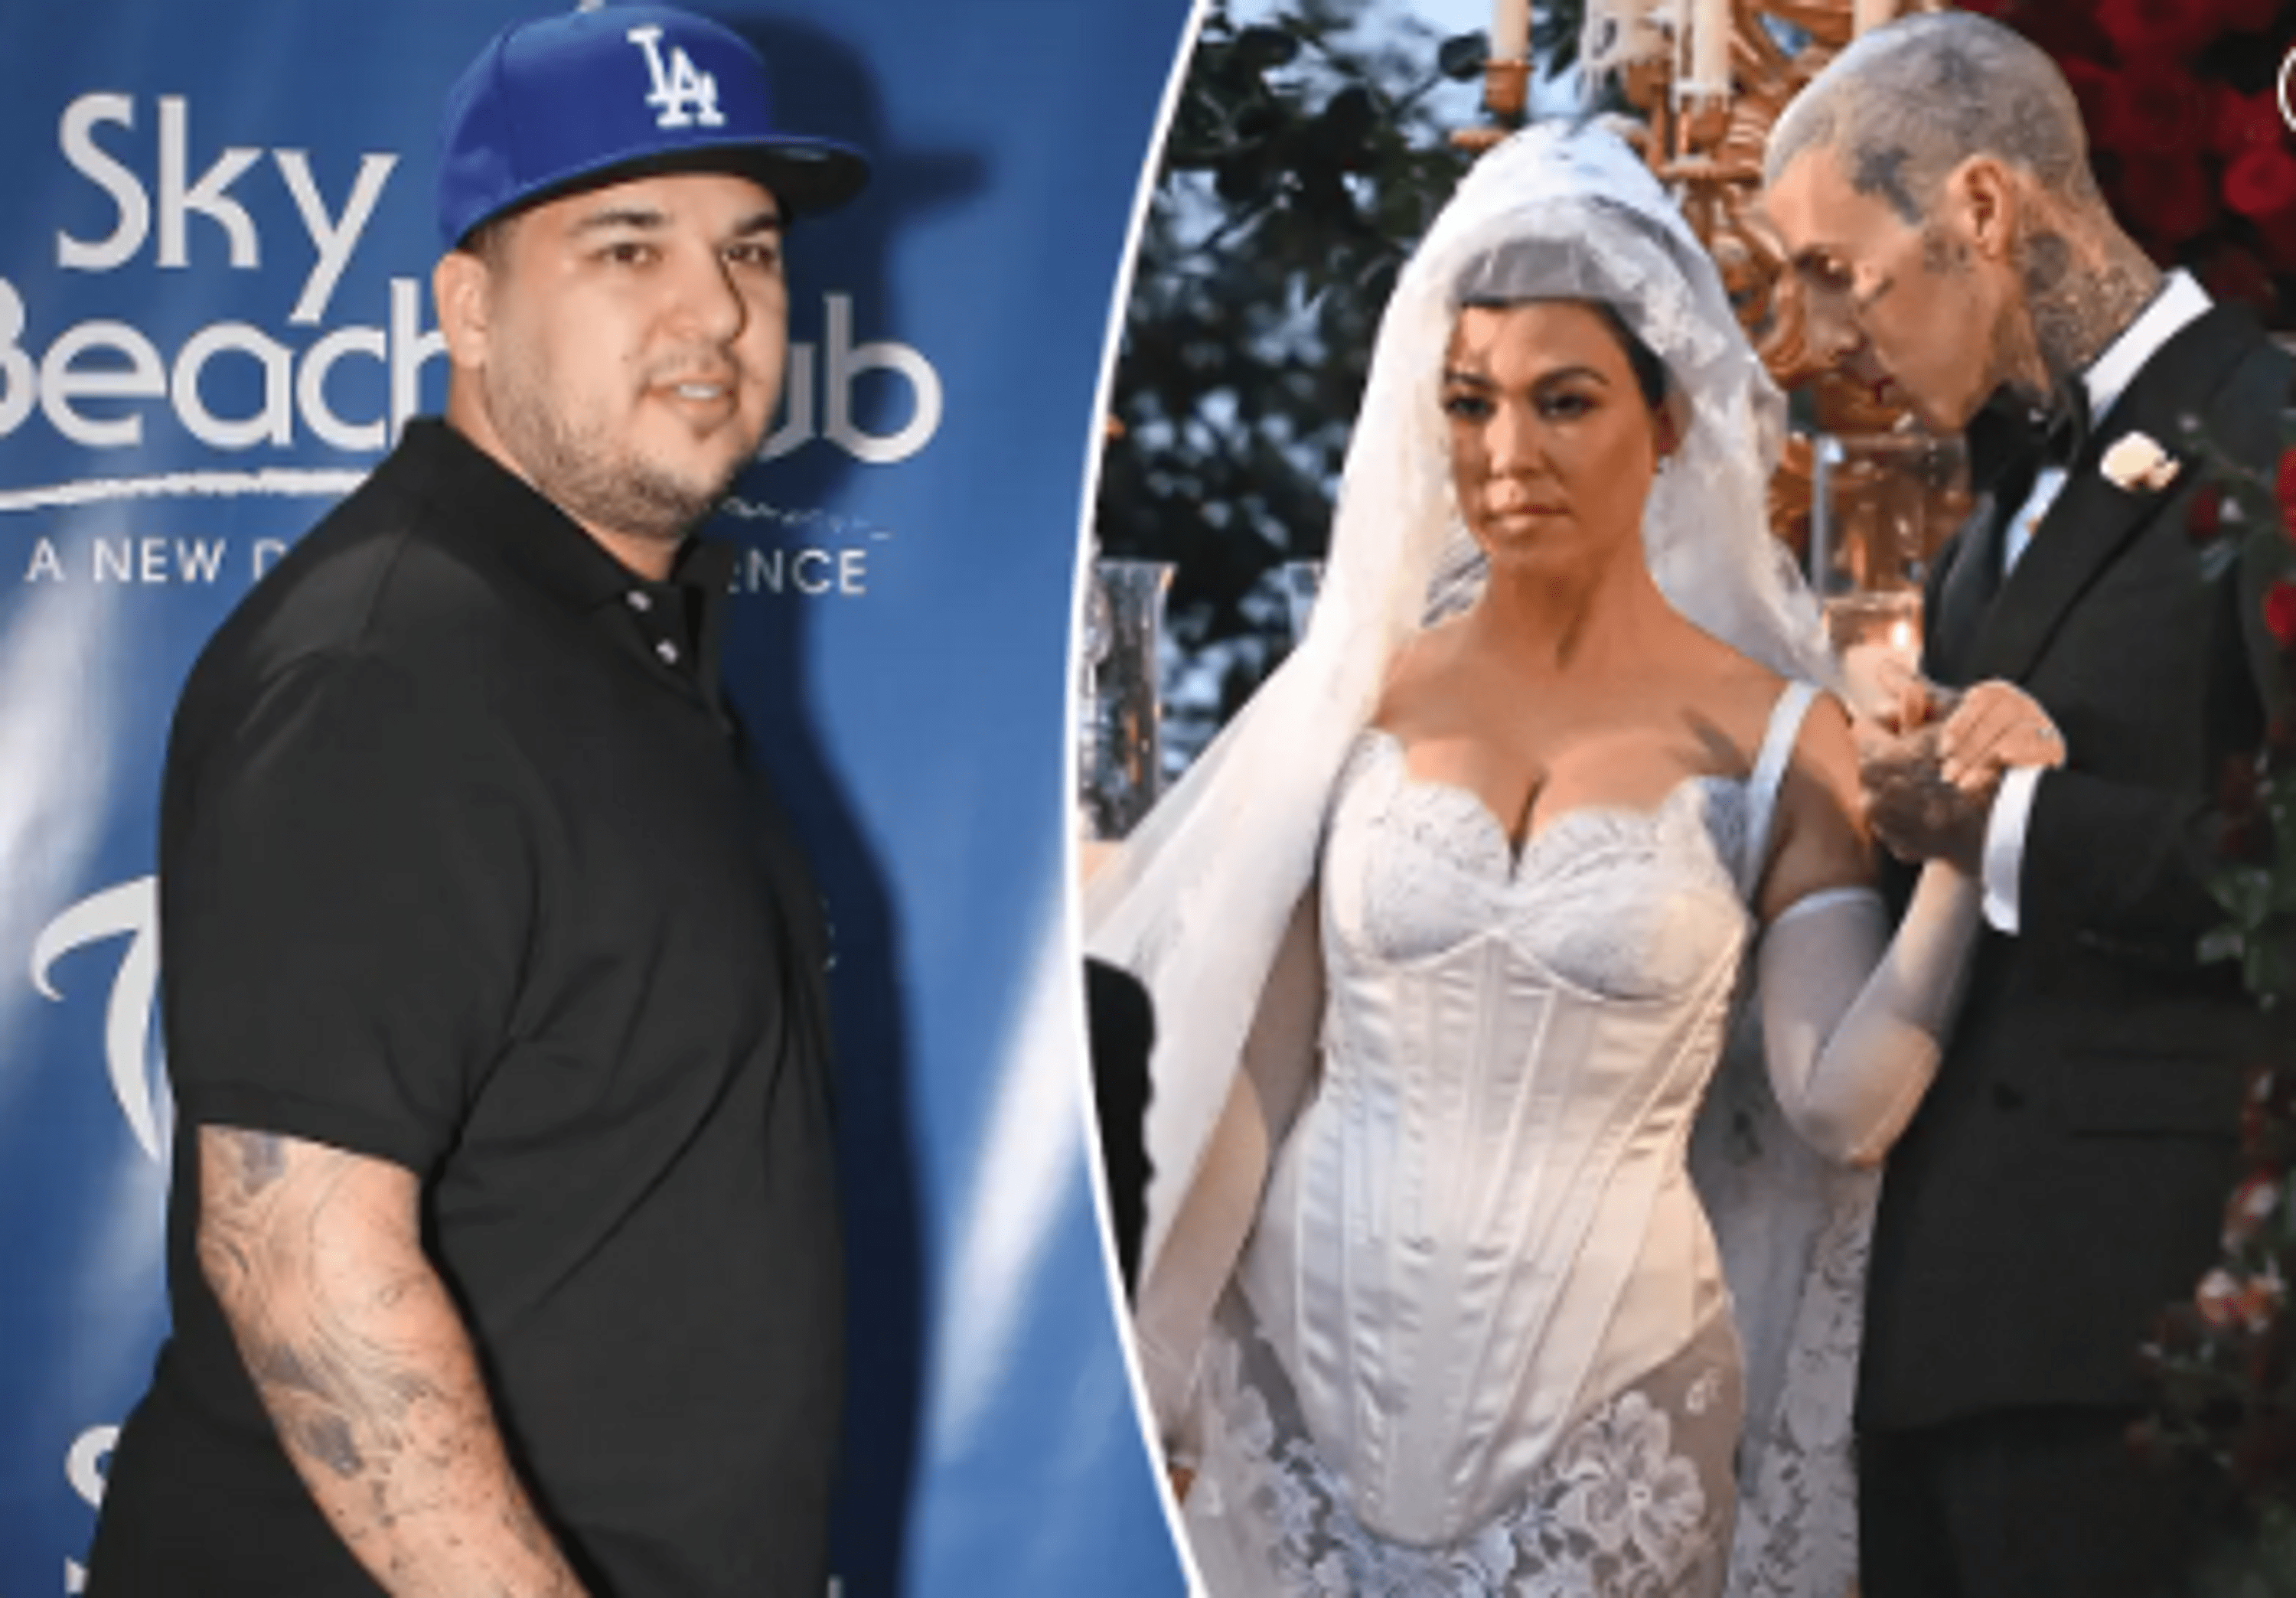 ”why-did-rob-kardashian-miss-his-sister-kourtney-and-travis-barkers-wedding-in-italy”